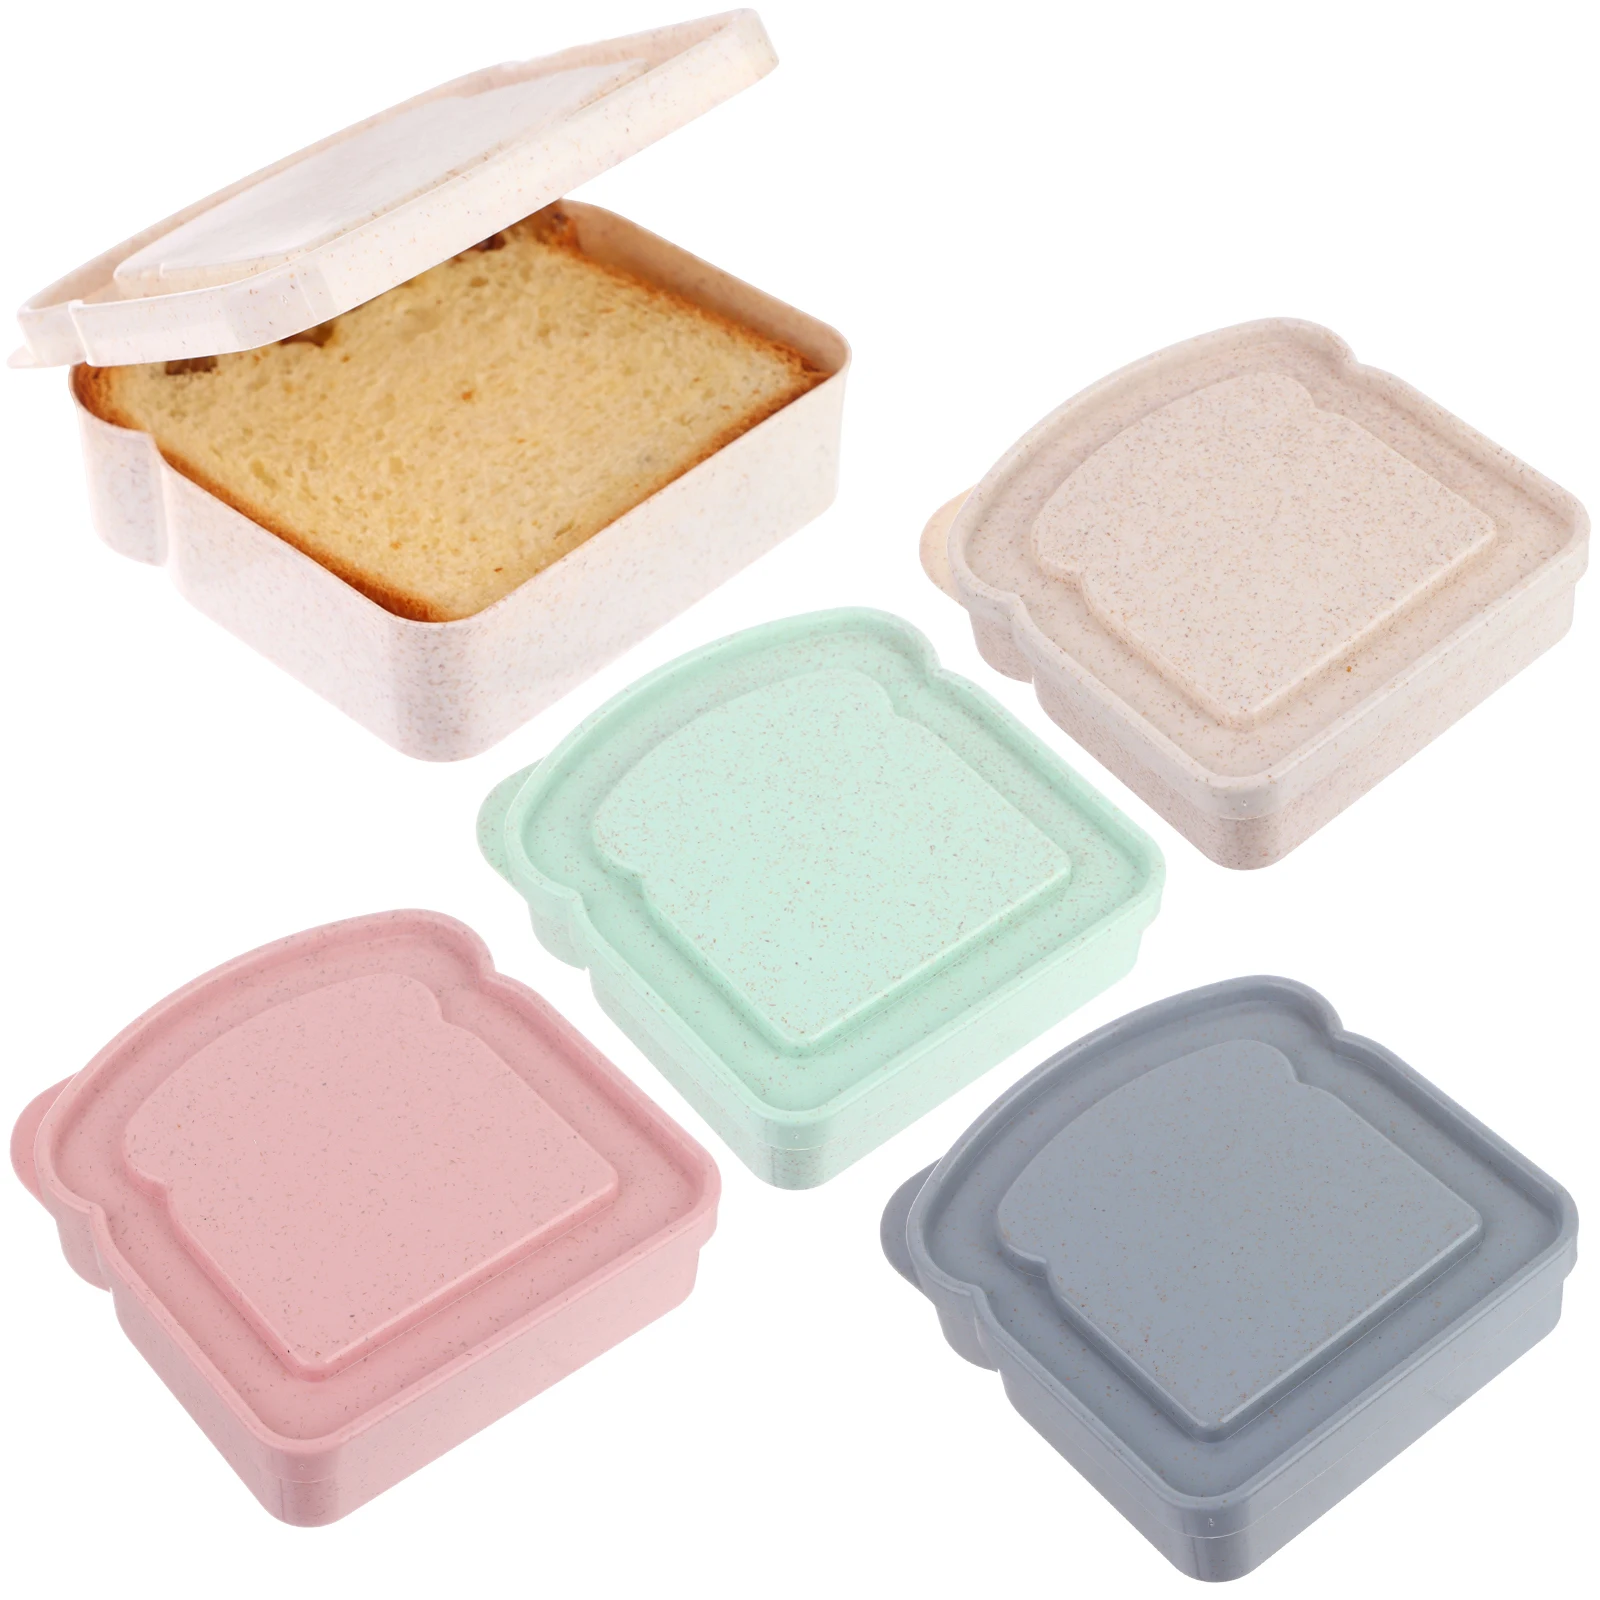 

8 Pcs Sandwich Containers Colorful Toast Shape Sandwich Box with Lid Reusable Sandwich Box Eco-friendly Sandwich Holder for Lunc